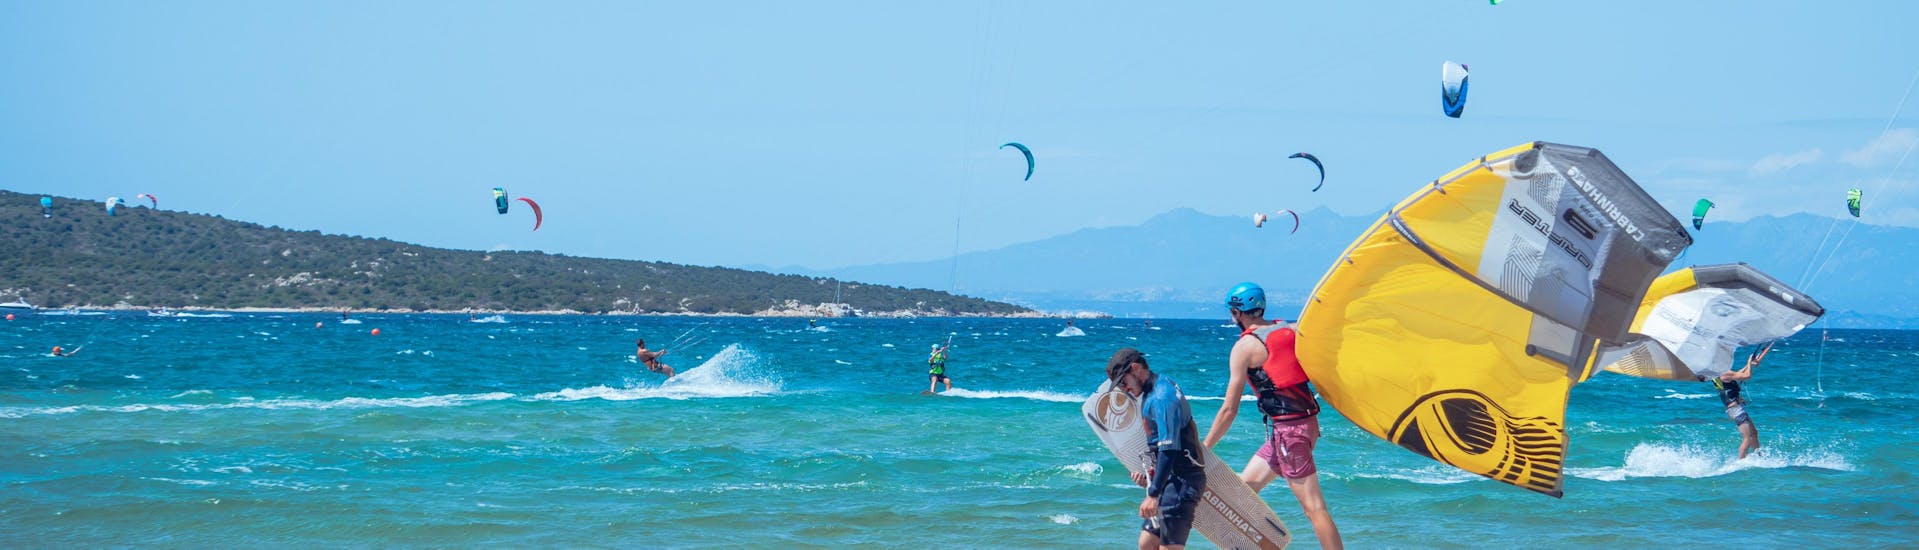 Individual Kitesurfing Course for Kids & Adults - All Levels.